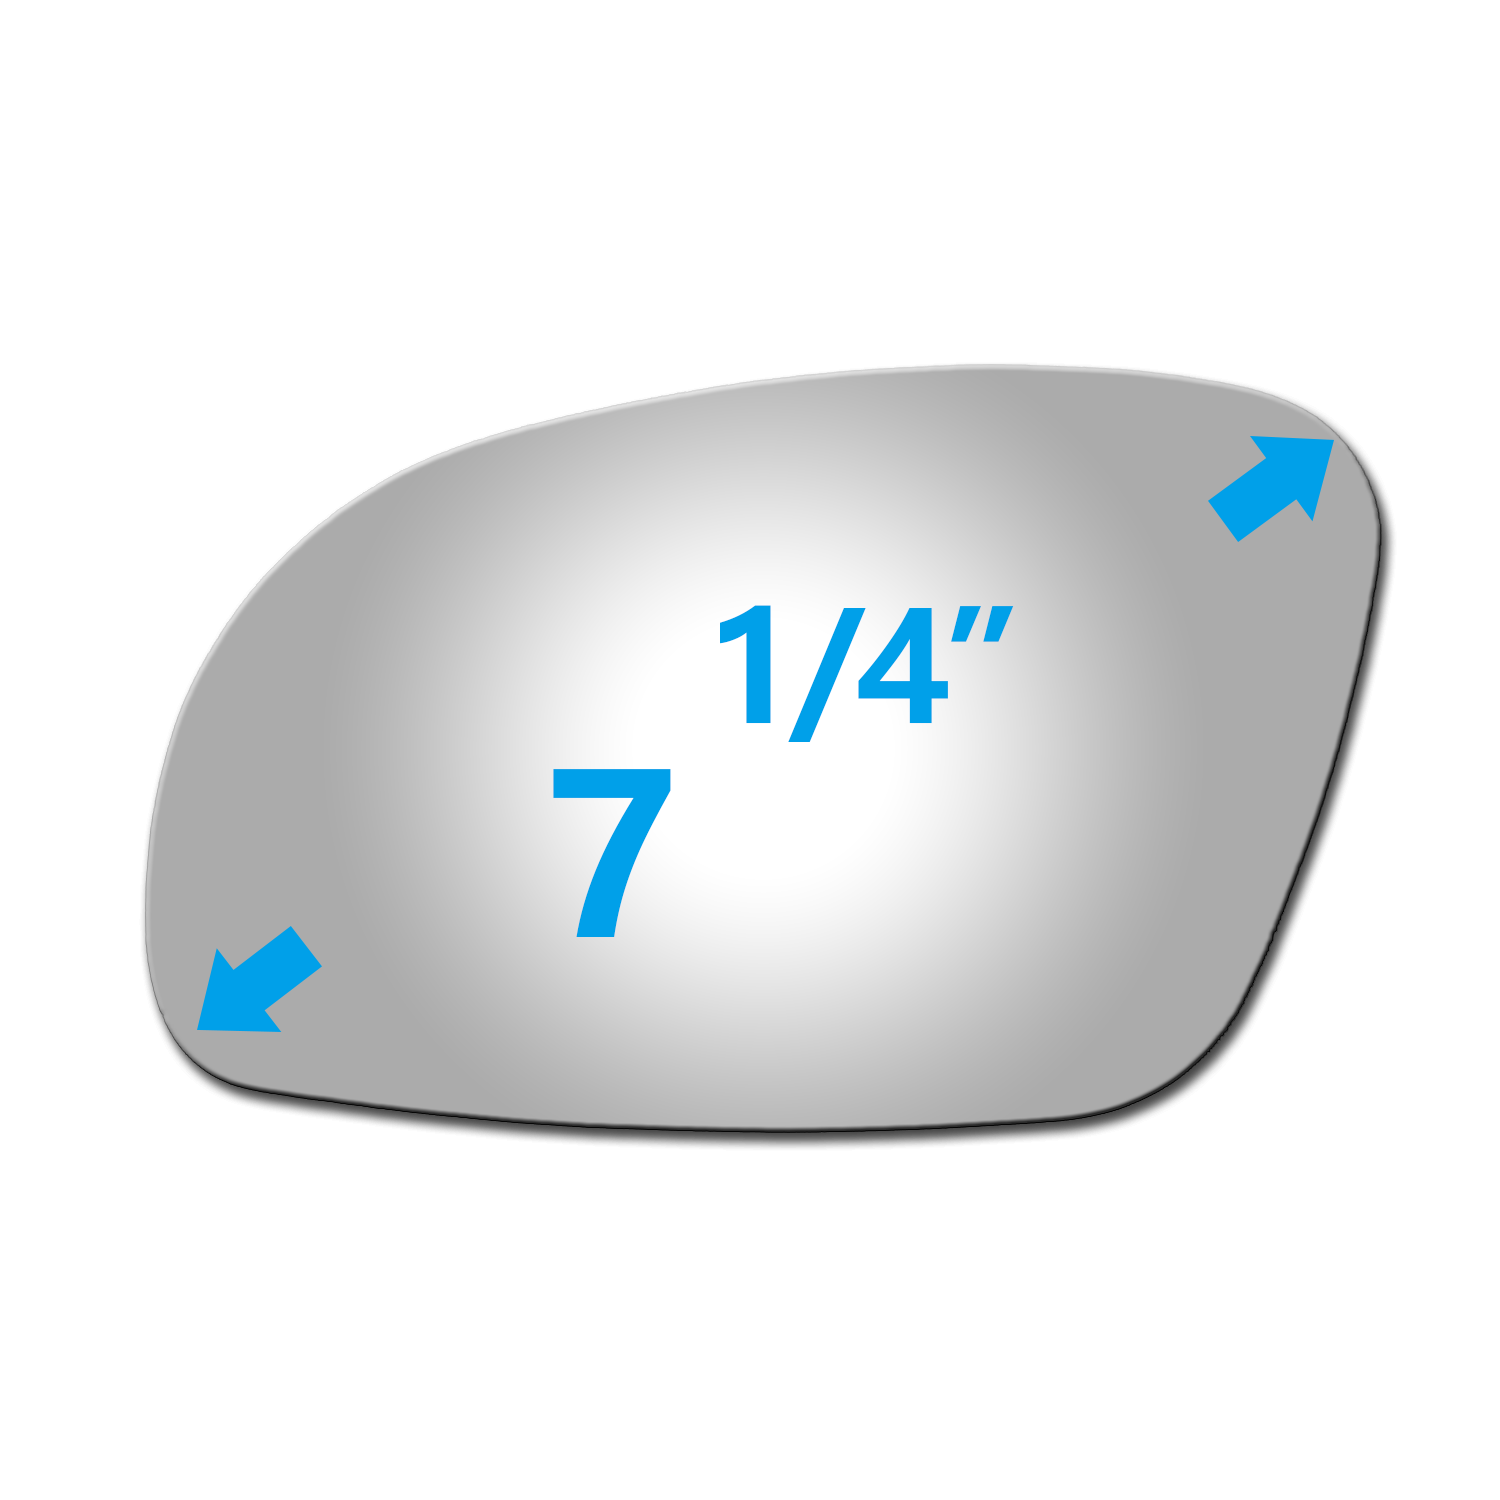 WLLW Replacement Mirror Glass for 2001-2010 Volkswagen Beetle, Driver Left Side LH/Passenger Right Side RH/The Both Sides Flat Convex M-0081